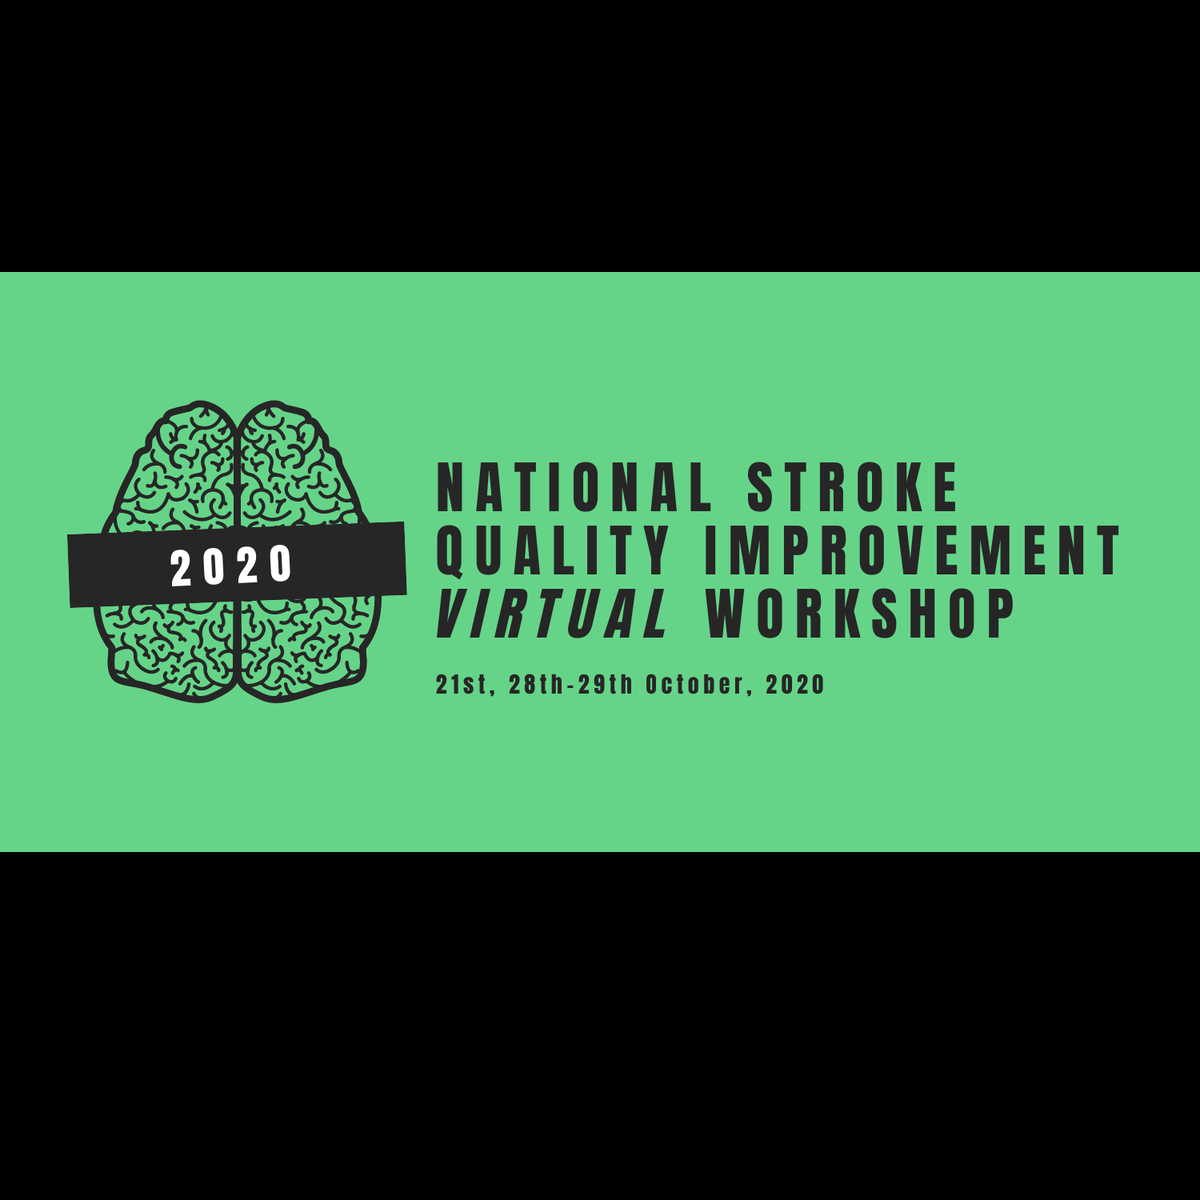 @TheFlorey, @strokefdn & @MonashUni are proud to present the 8th annual National #Stroke #Qualityimprovement Workshop. We look forward to seeing you online! Join the mailing list here to keep updated: mailchi.mp/9480b52d0c17/n…